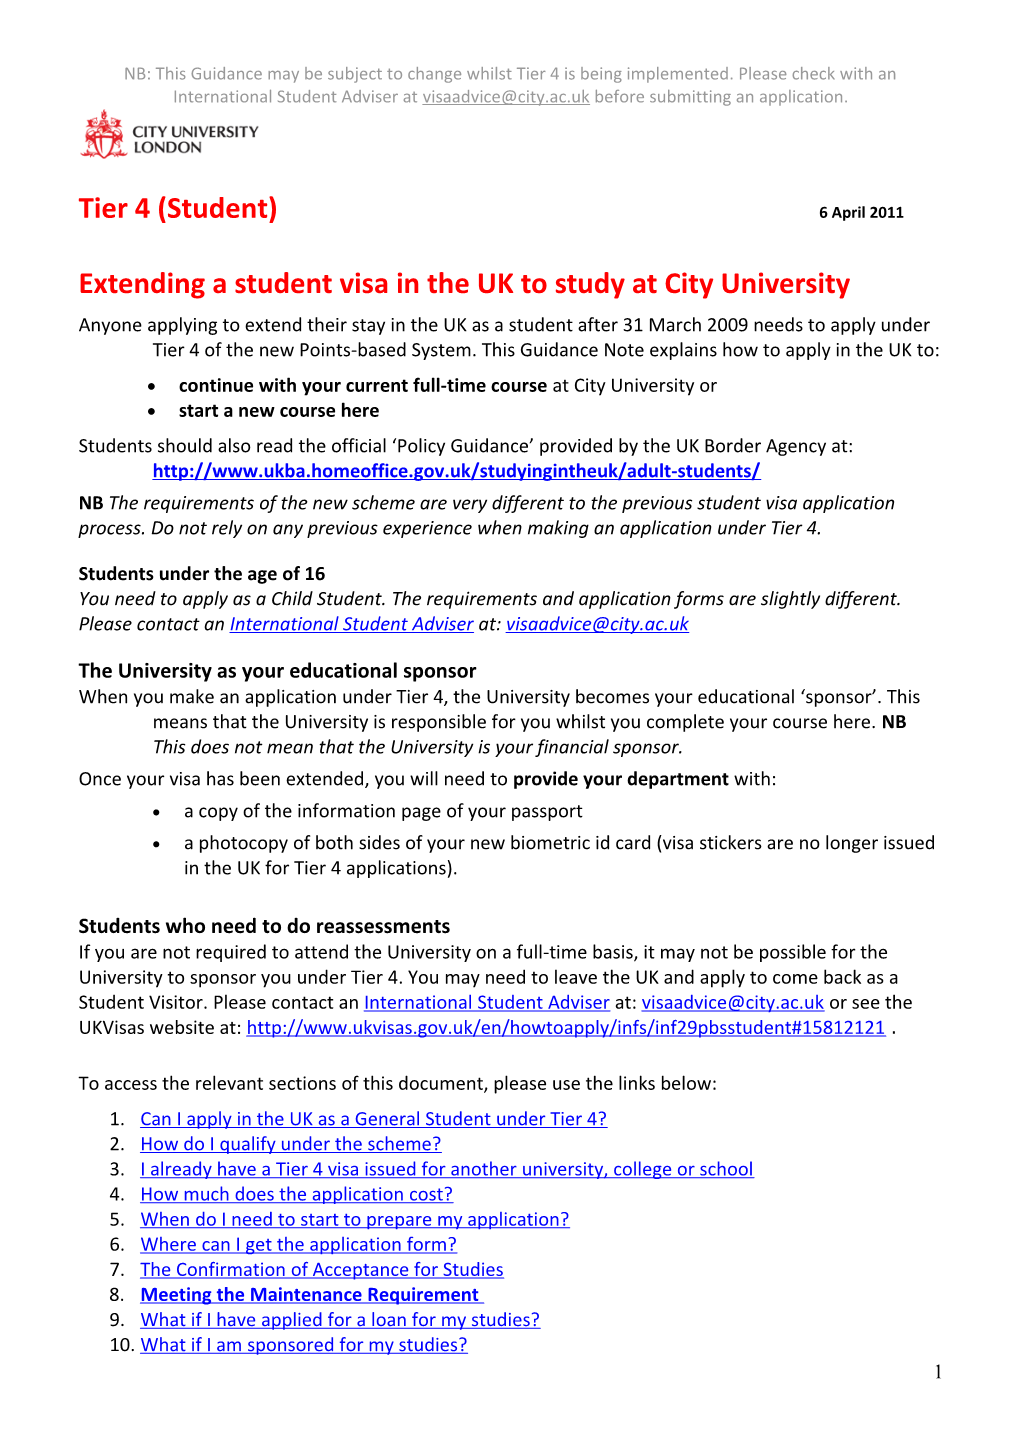 Extending a Student Visa in the UK to Study at City University